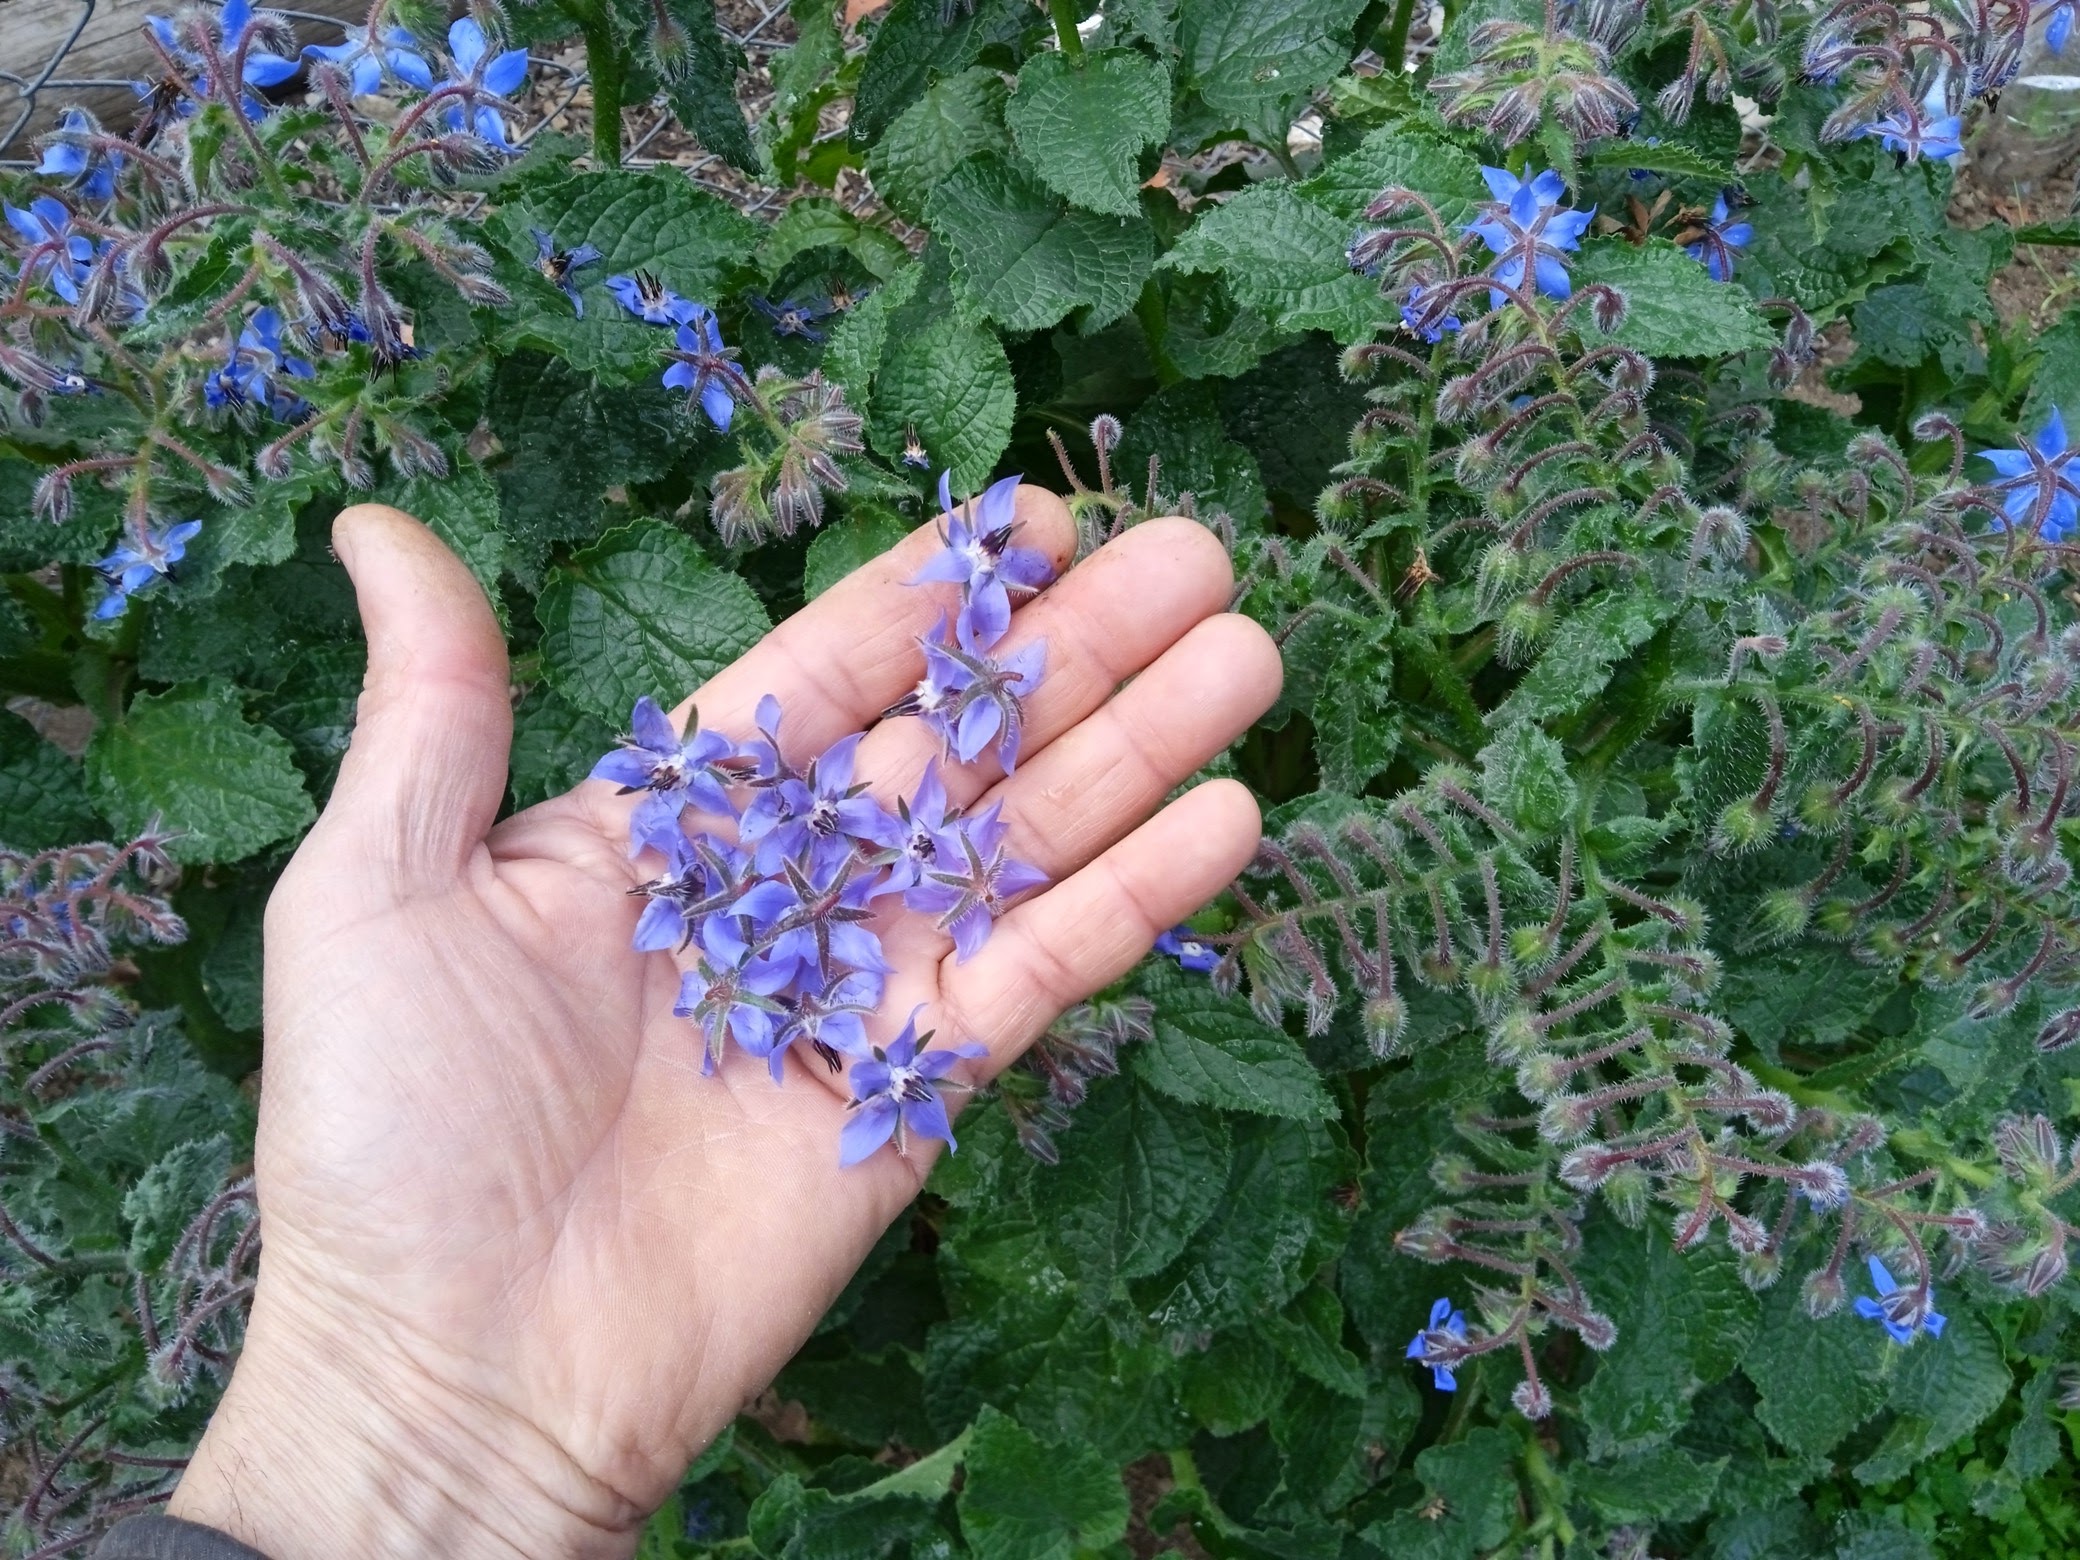 When borage starts flowering, you can harvest frequently to encourage more bloom-production